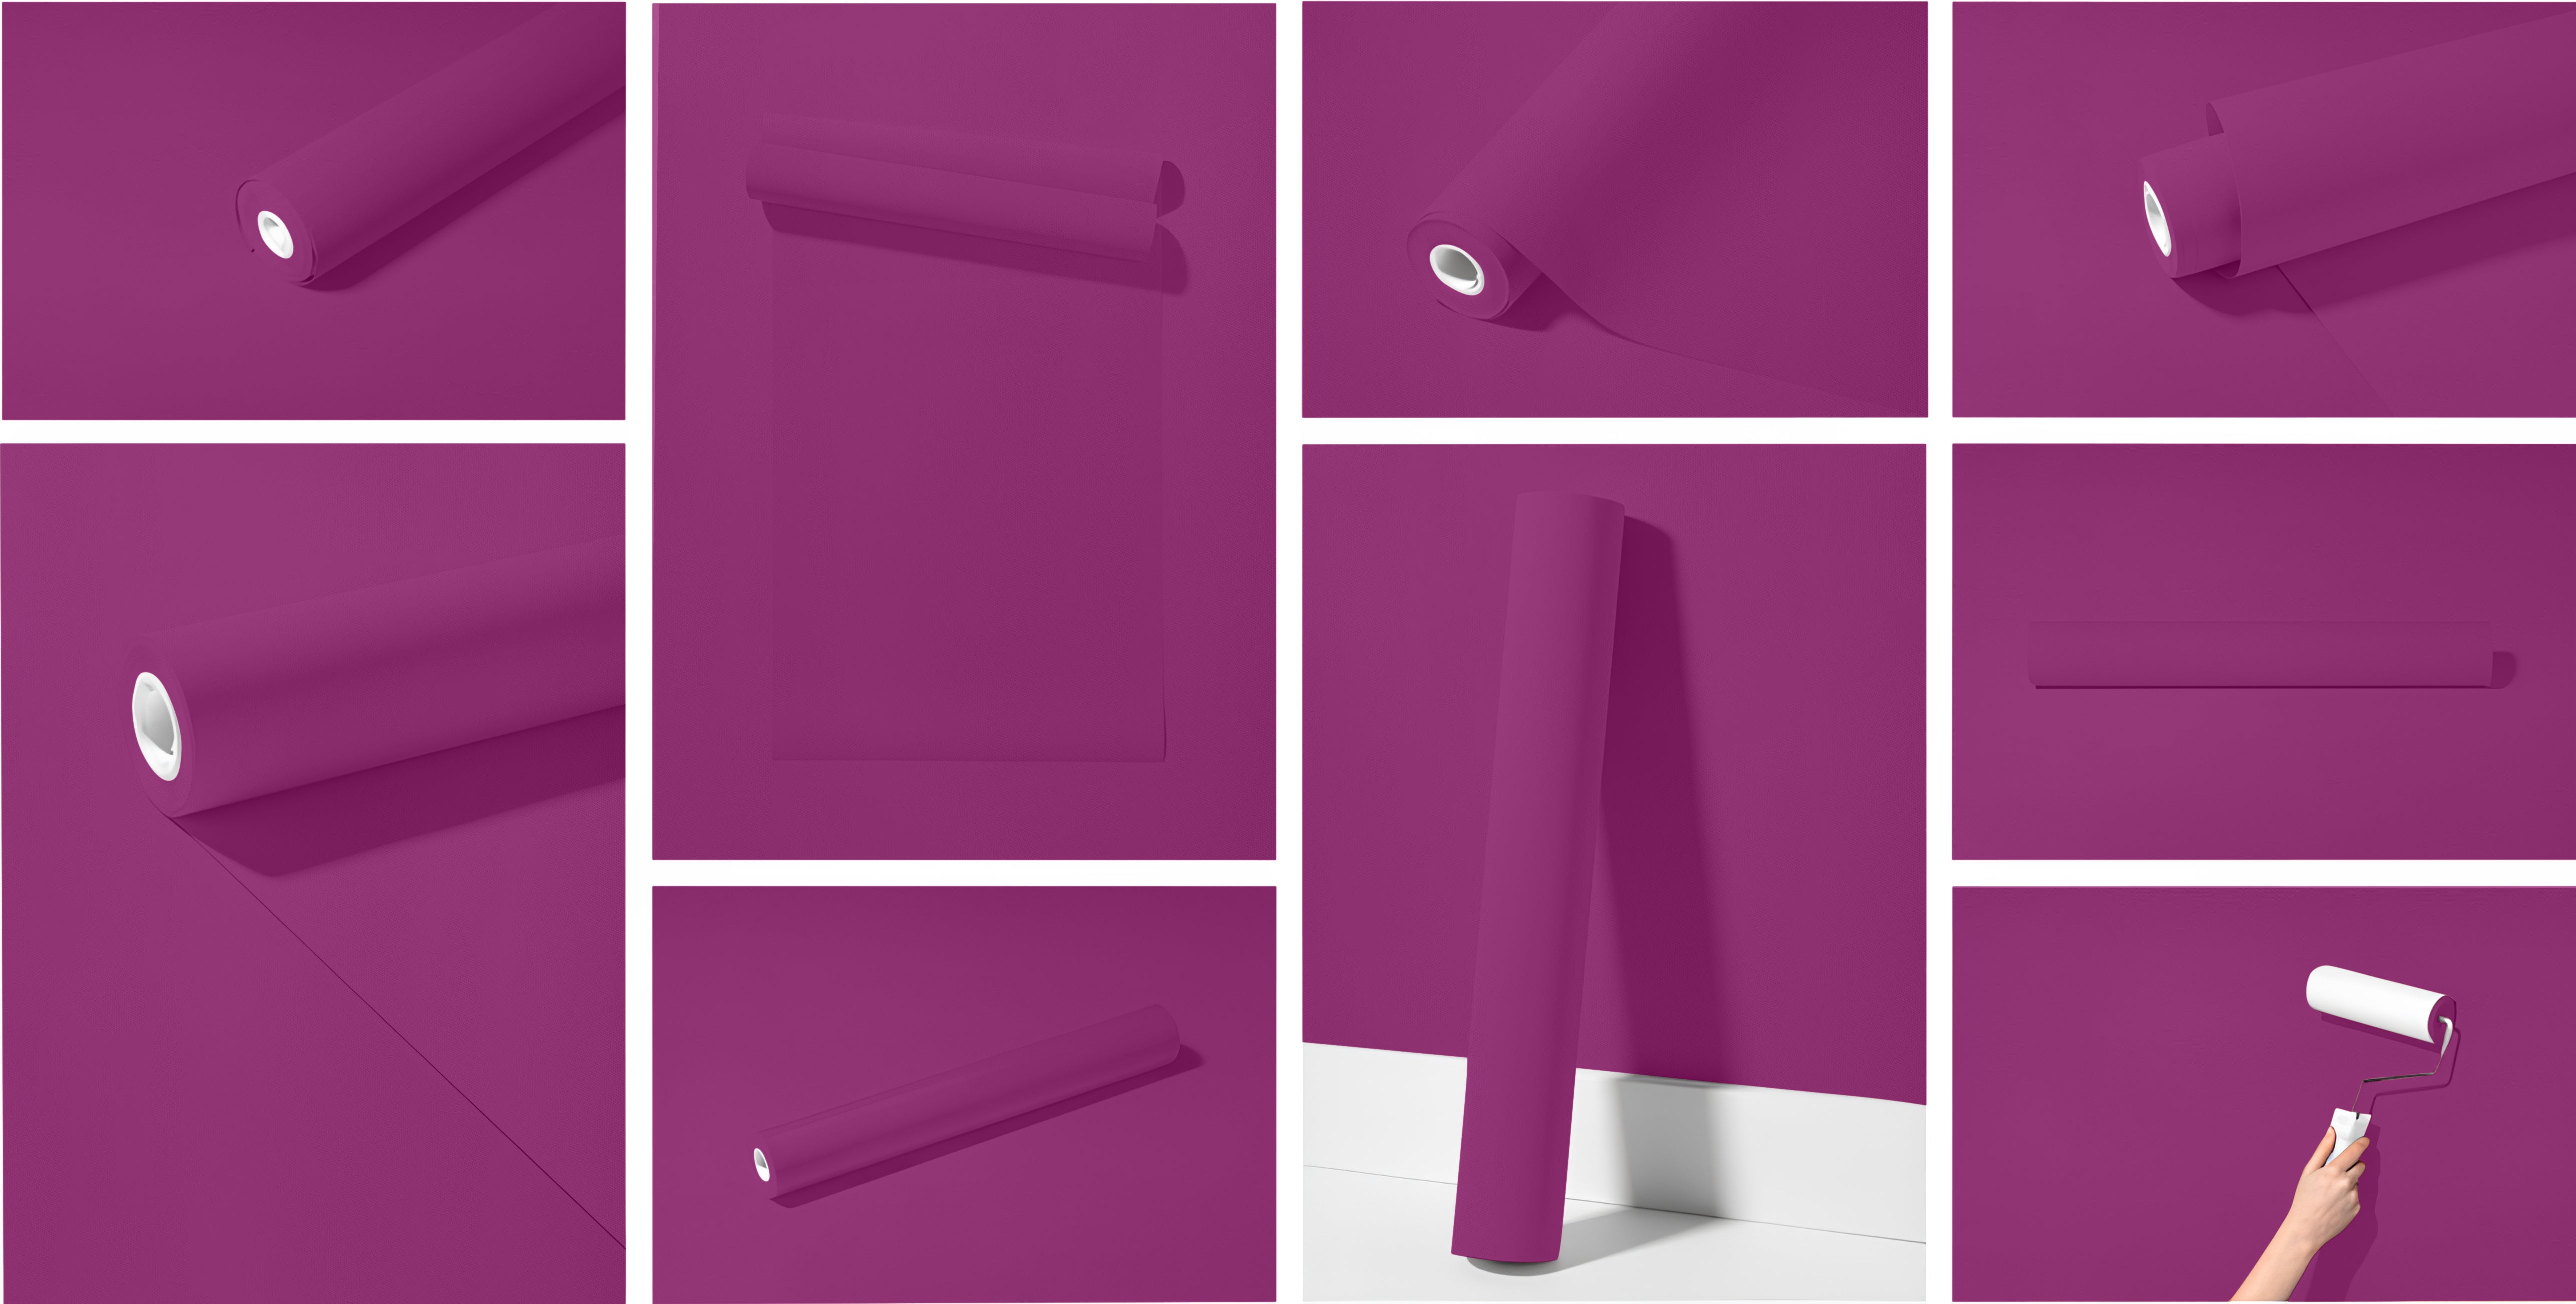 Peel & Stick Removable Re-usable Paint - Color RAL 4006 Traffic Purple - offRAL™ - RALRAW LLC, USA